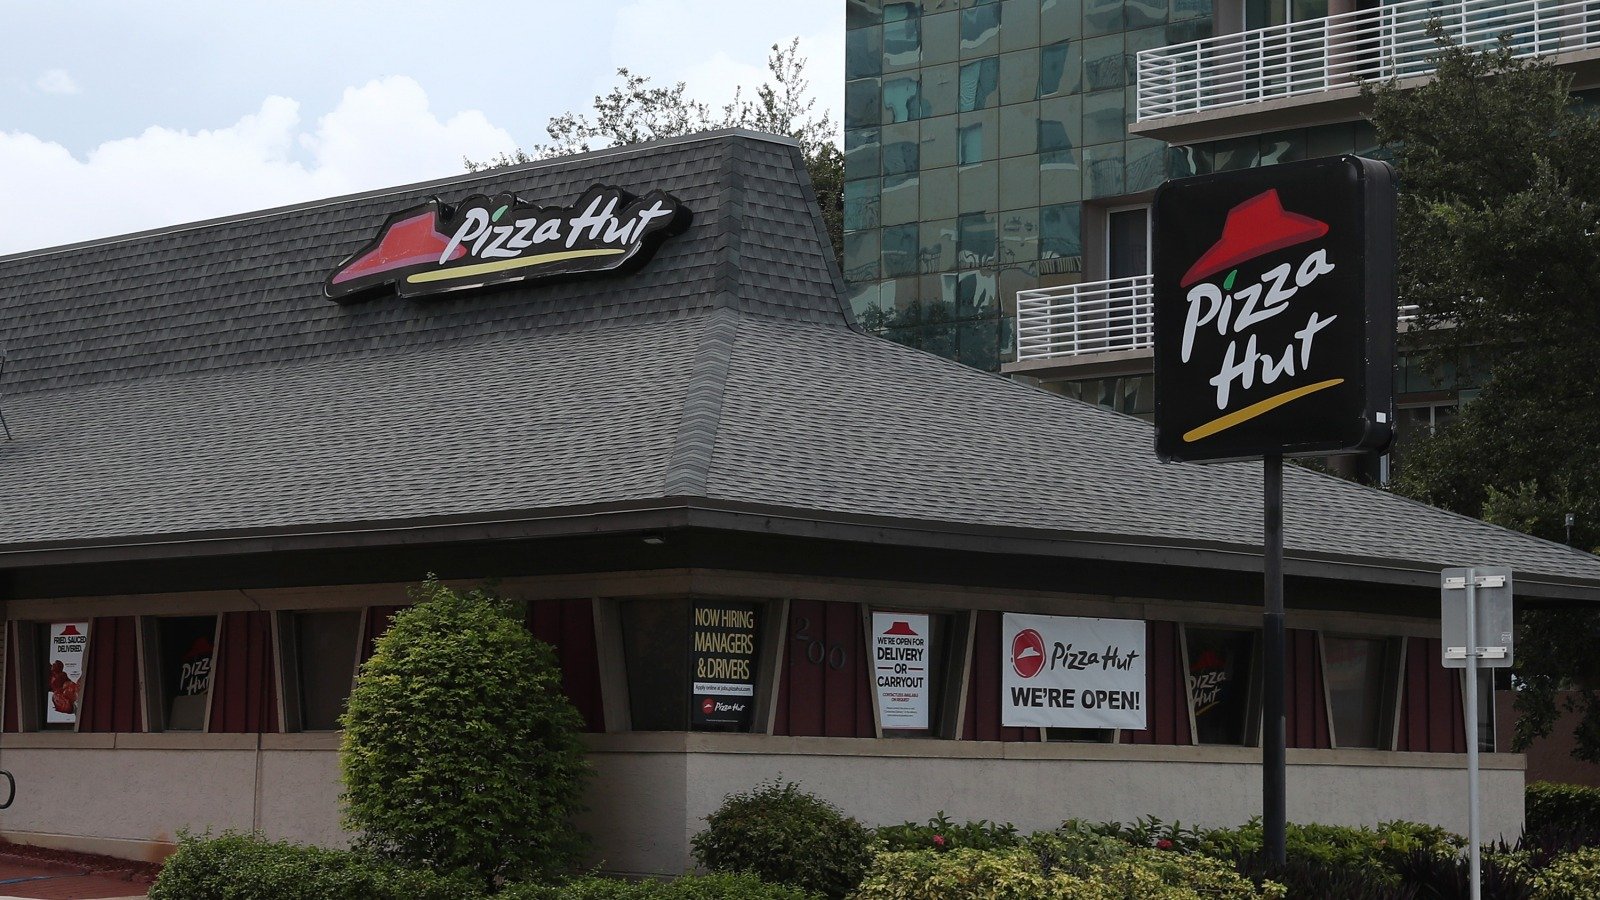 Workers Reveal What It's Really Like To Work At Pizza Hut - Mashed